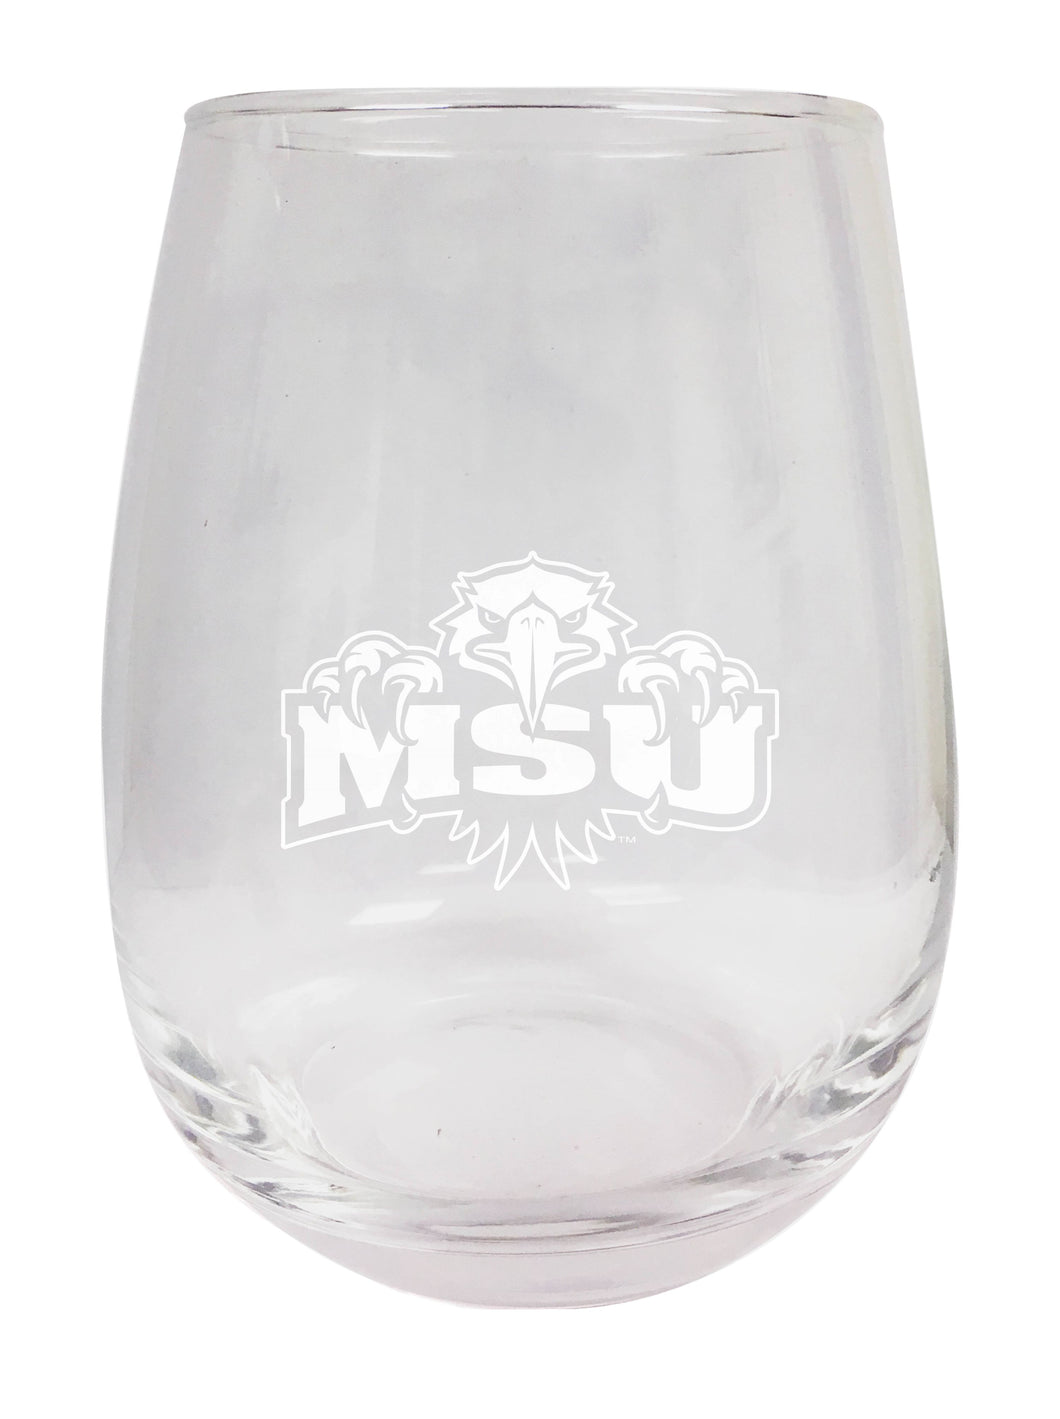 Morehead State University NCAA 15 oz Laser-Engraved Stemless Wine Glass - Perfect for Alumni & Fans